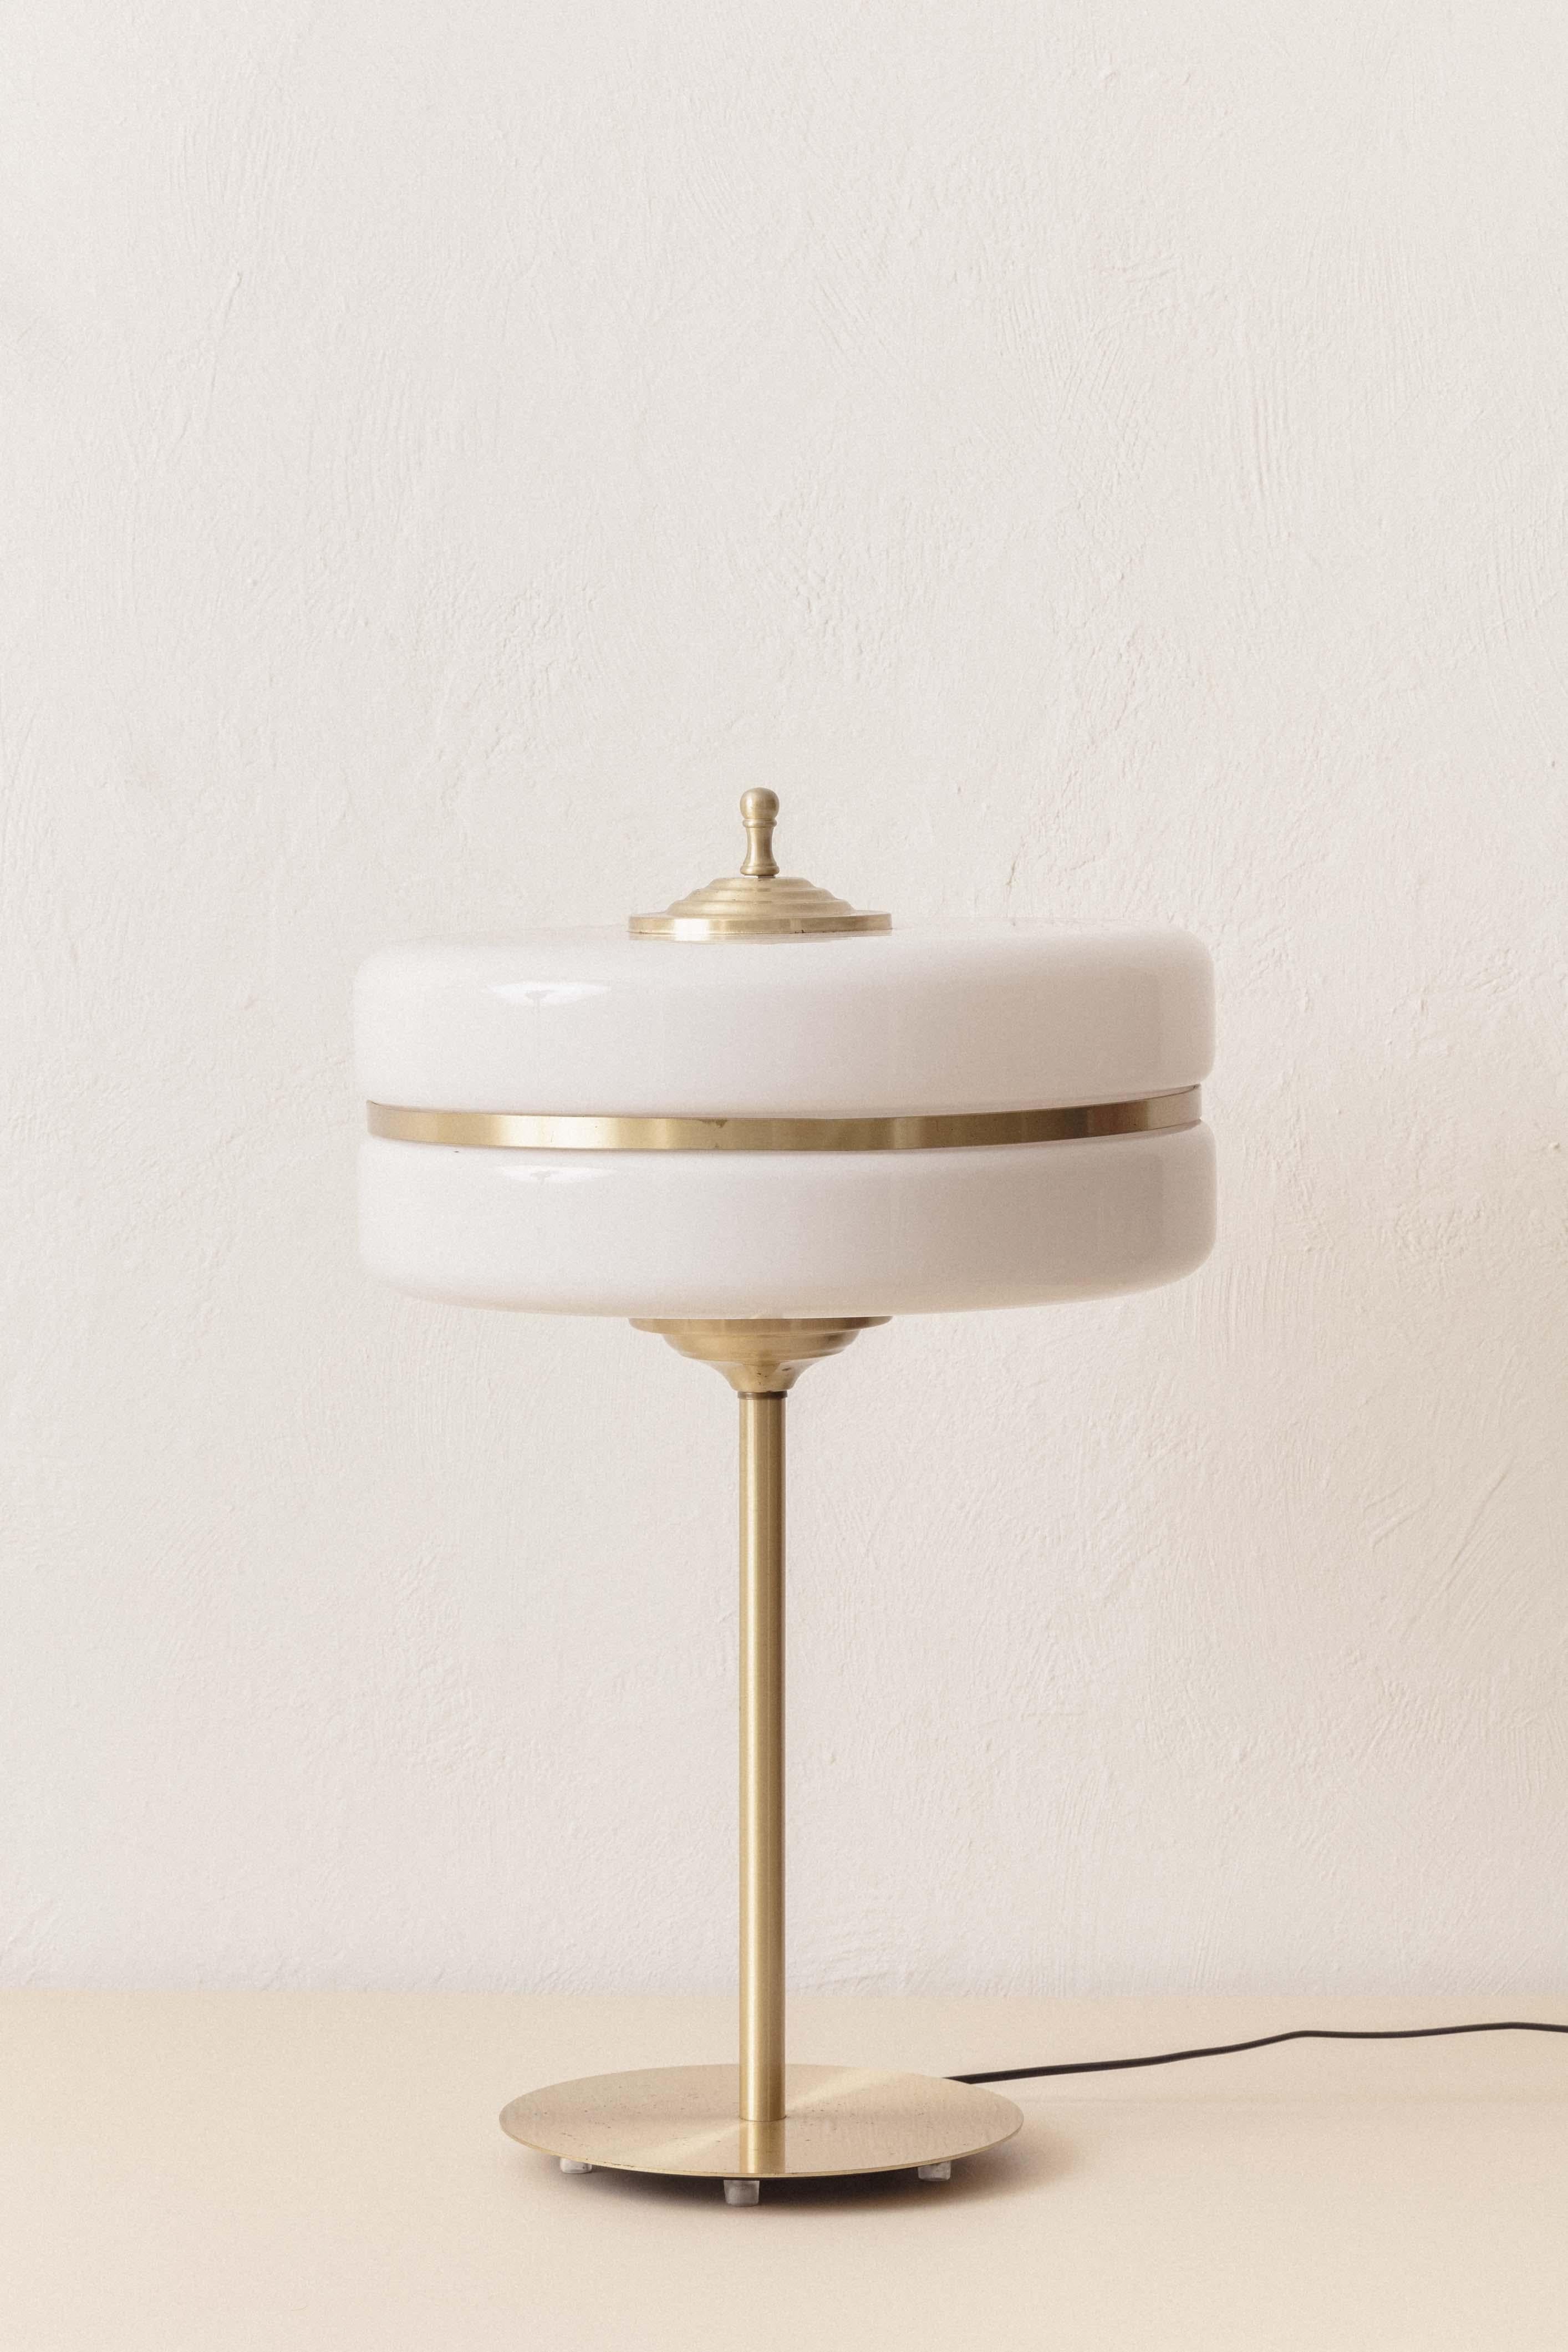 Brazilian Table Lamp in Iron, Brass and Opaline Glass, Unknown Designer, 1970, Brazil For Sale